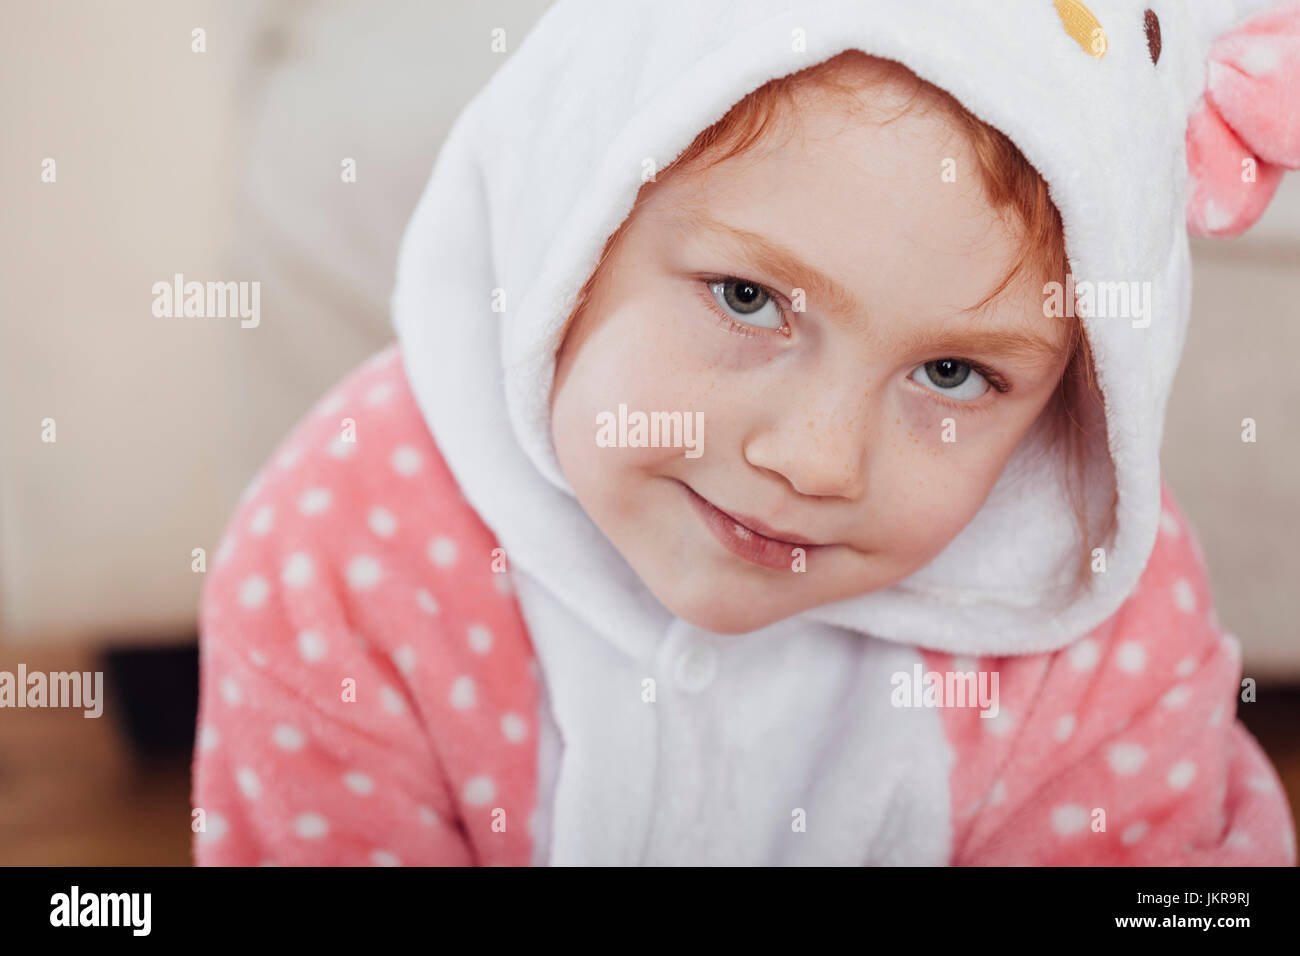 Close-up portrait of smiling girl wearing hooded shirt at home Stock Photo